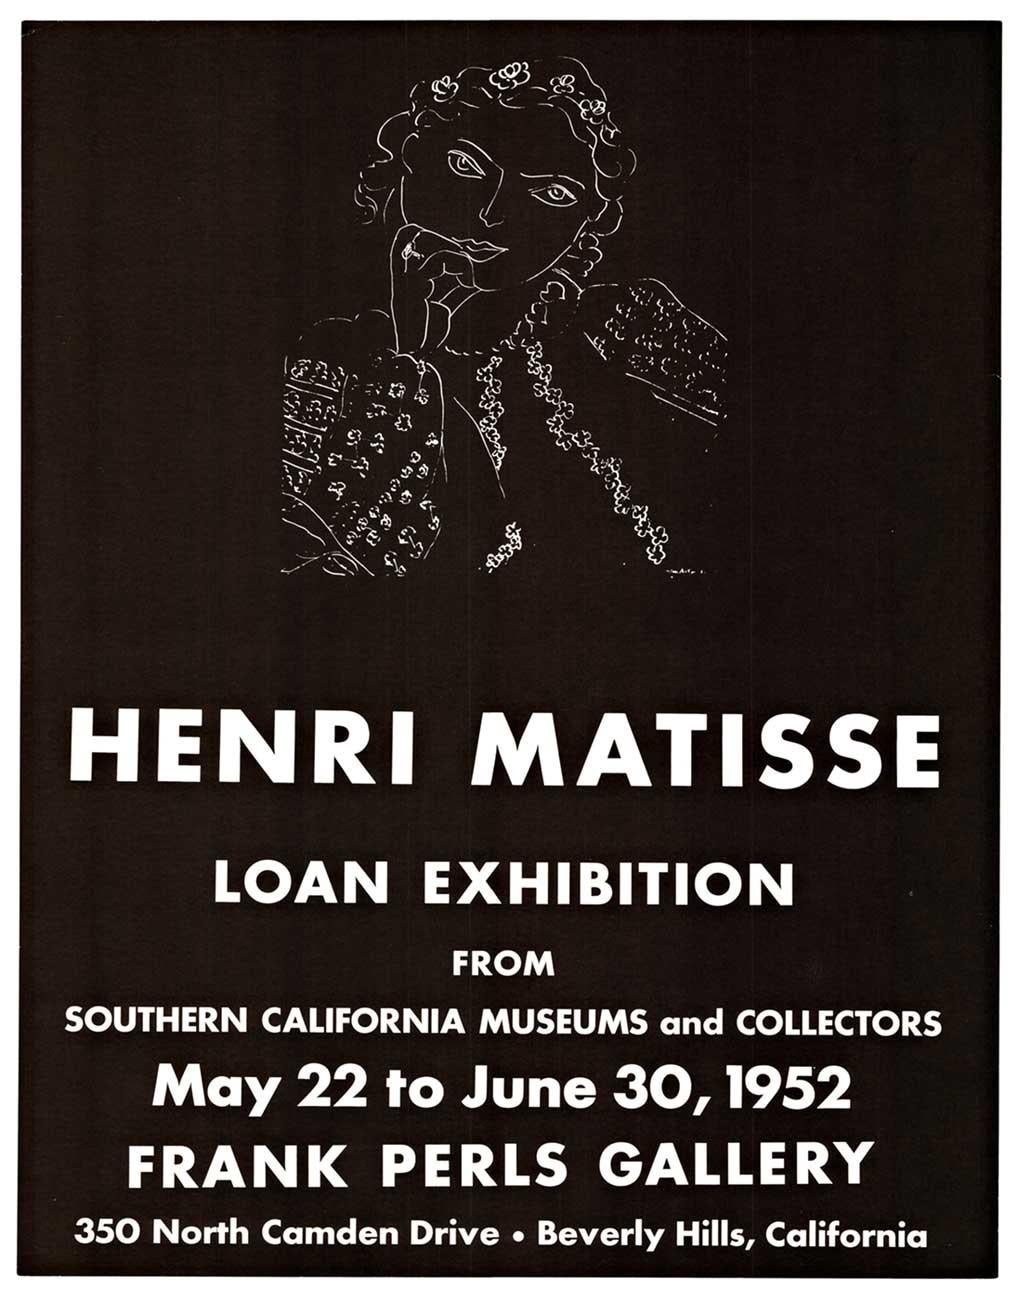 Original vintage exhibition poster:  HENRI MATISSE EXHIBITION.  Linen baked in excellent condition, ready to frame.   The background is a flat black, dark charcoal grey/black.

Original poster:  Southern California Museums and Collectors, Frank